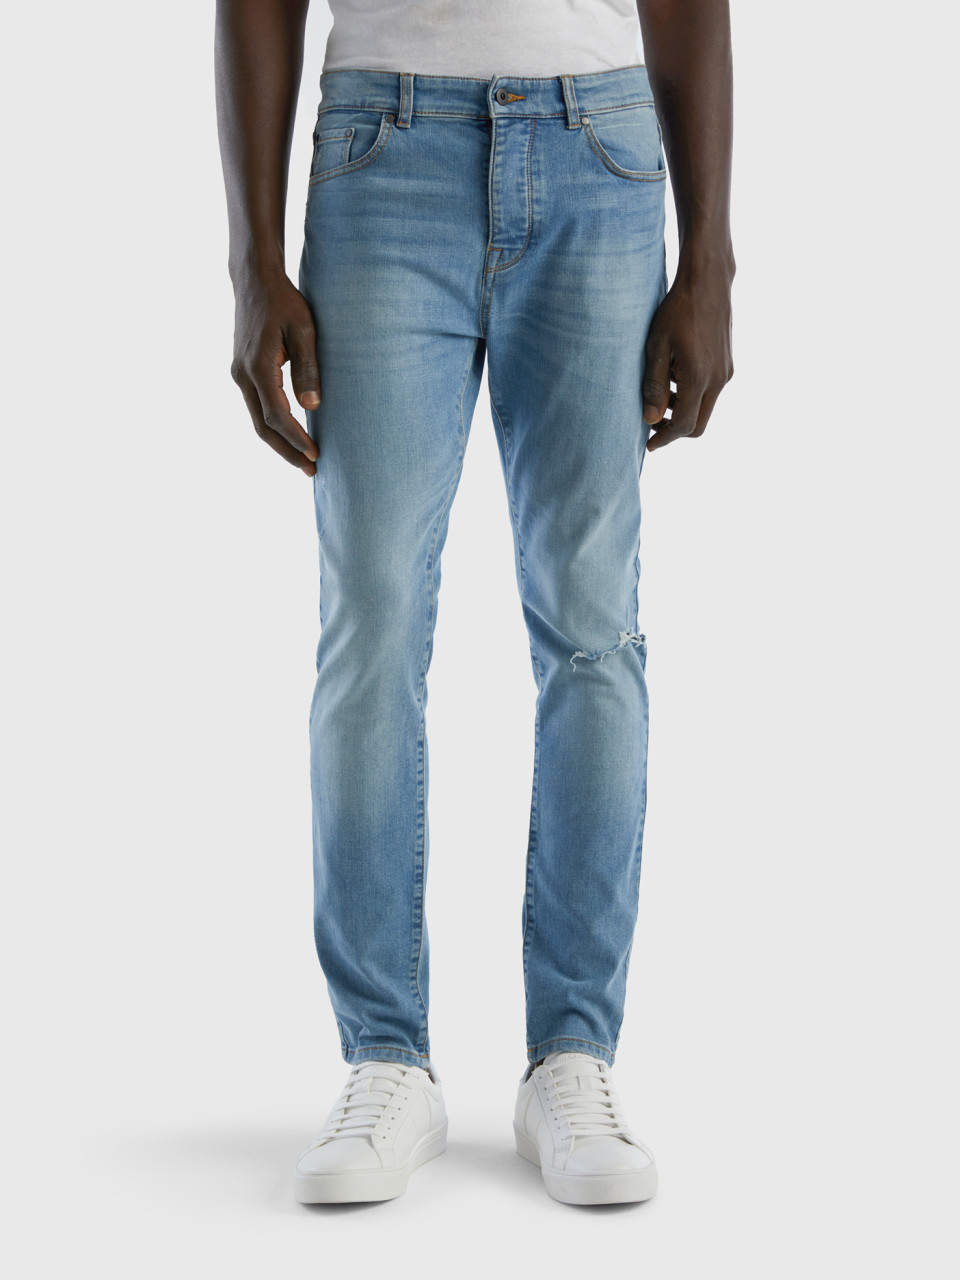 Benetton, Jeans Coupe Skinny, Bleu, Homme